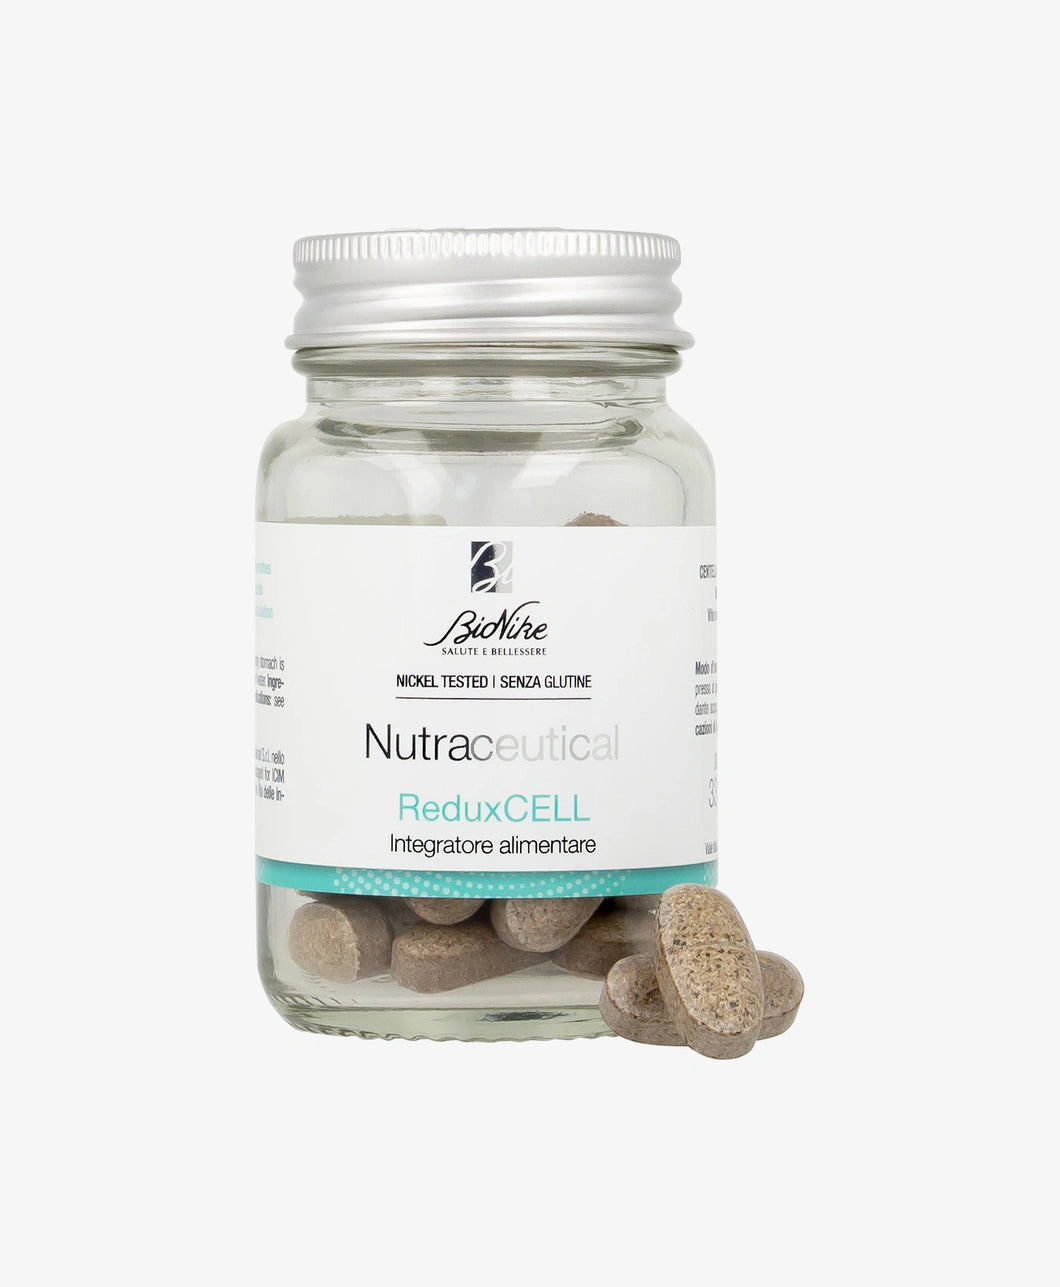 DEFENCE BODY NUTRACEUTICAL REDUXCELL INTEGRATORE ALIMENTARE